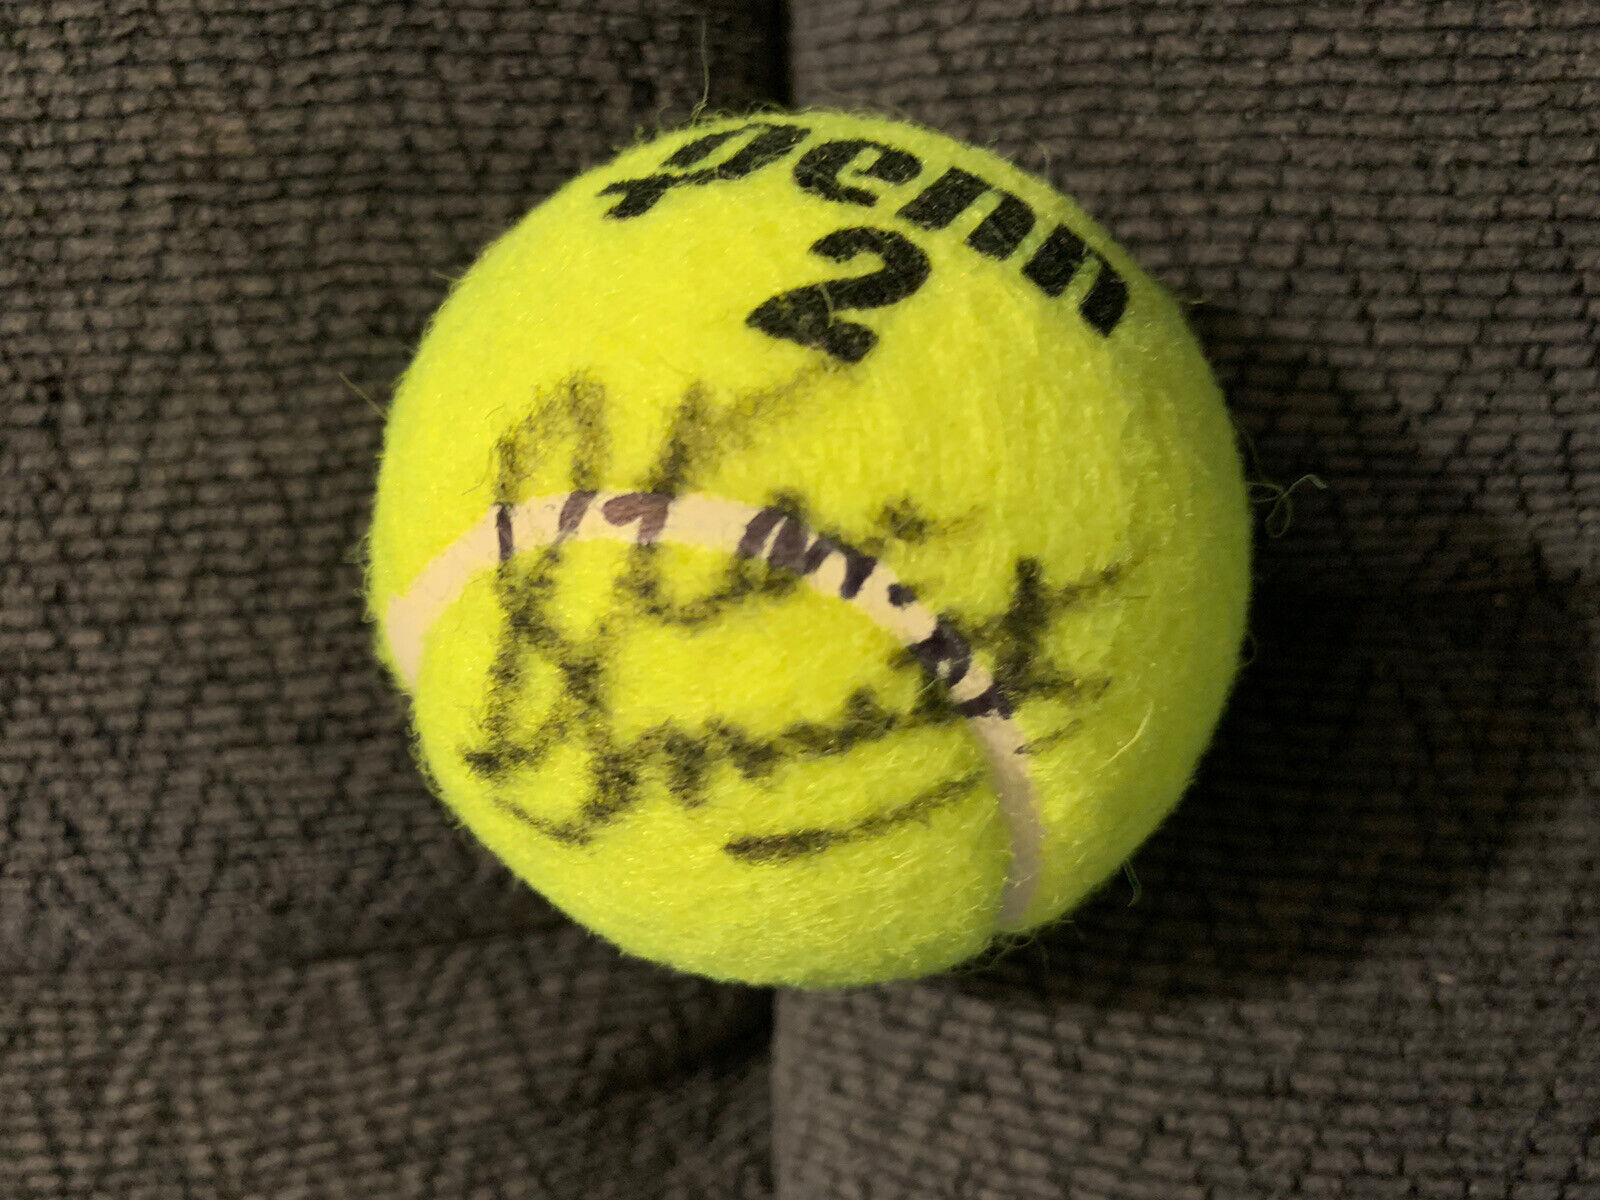 Tennis Legend Stan Smith Signed Tennis Ball Autographed